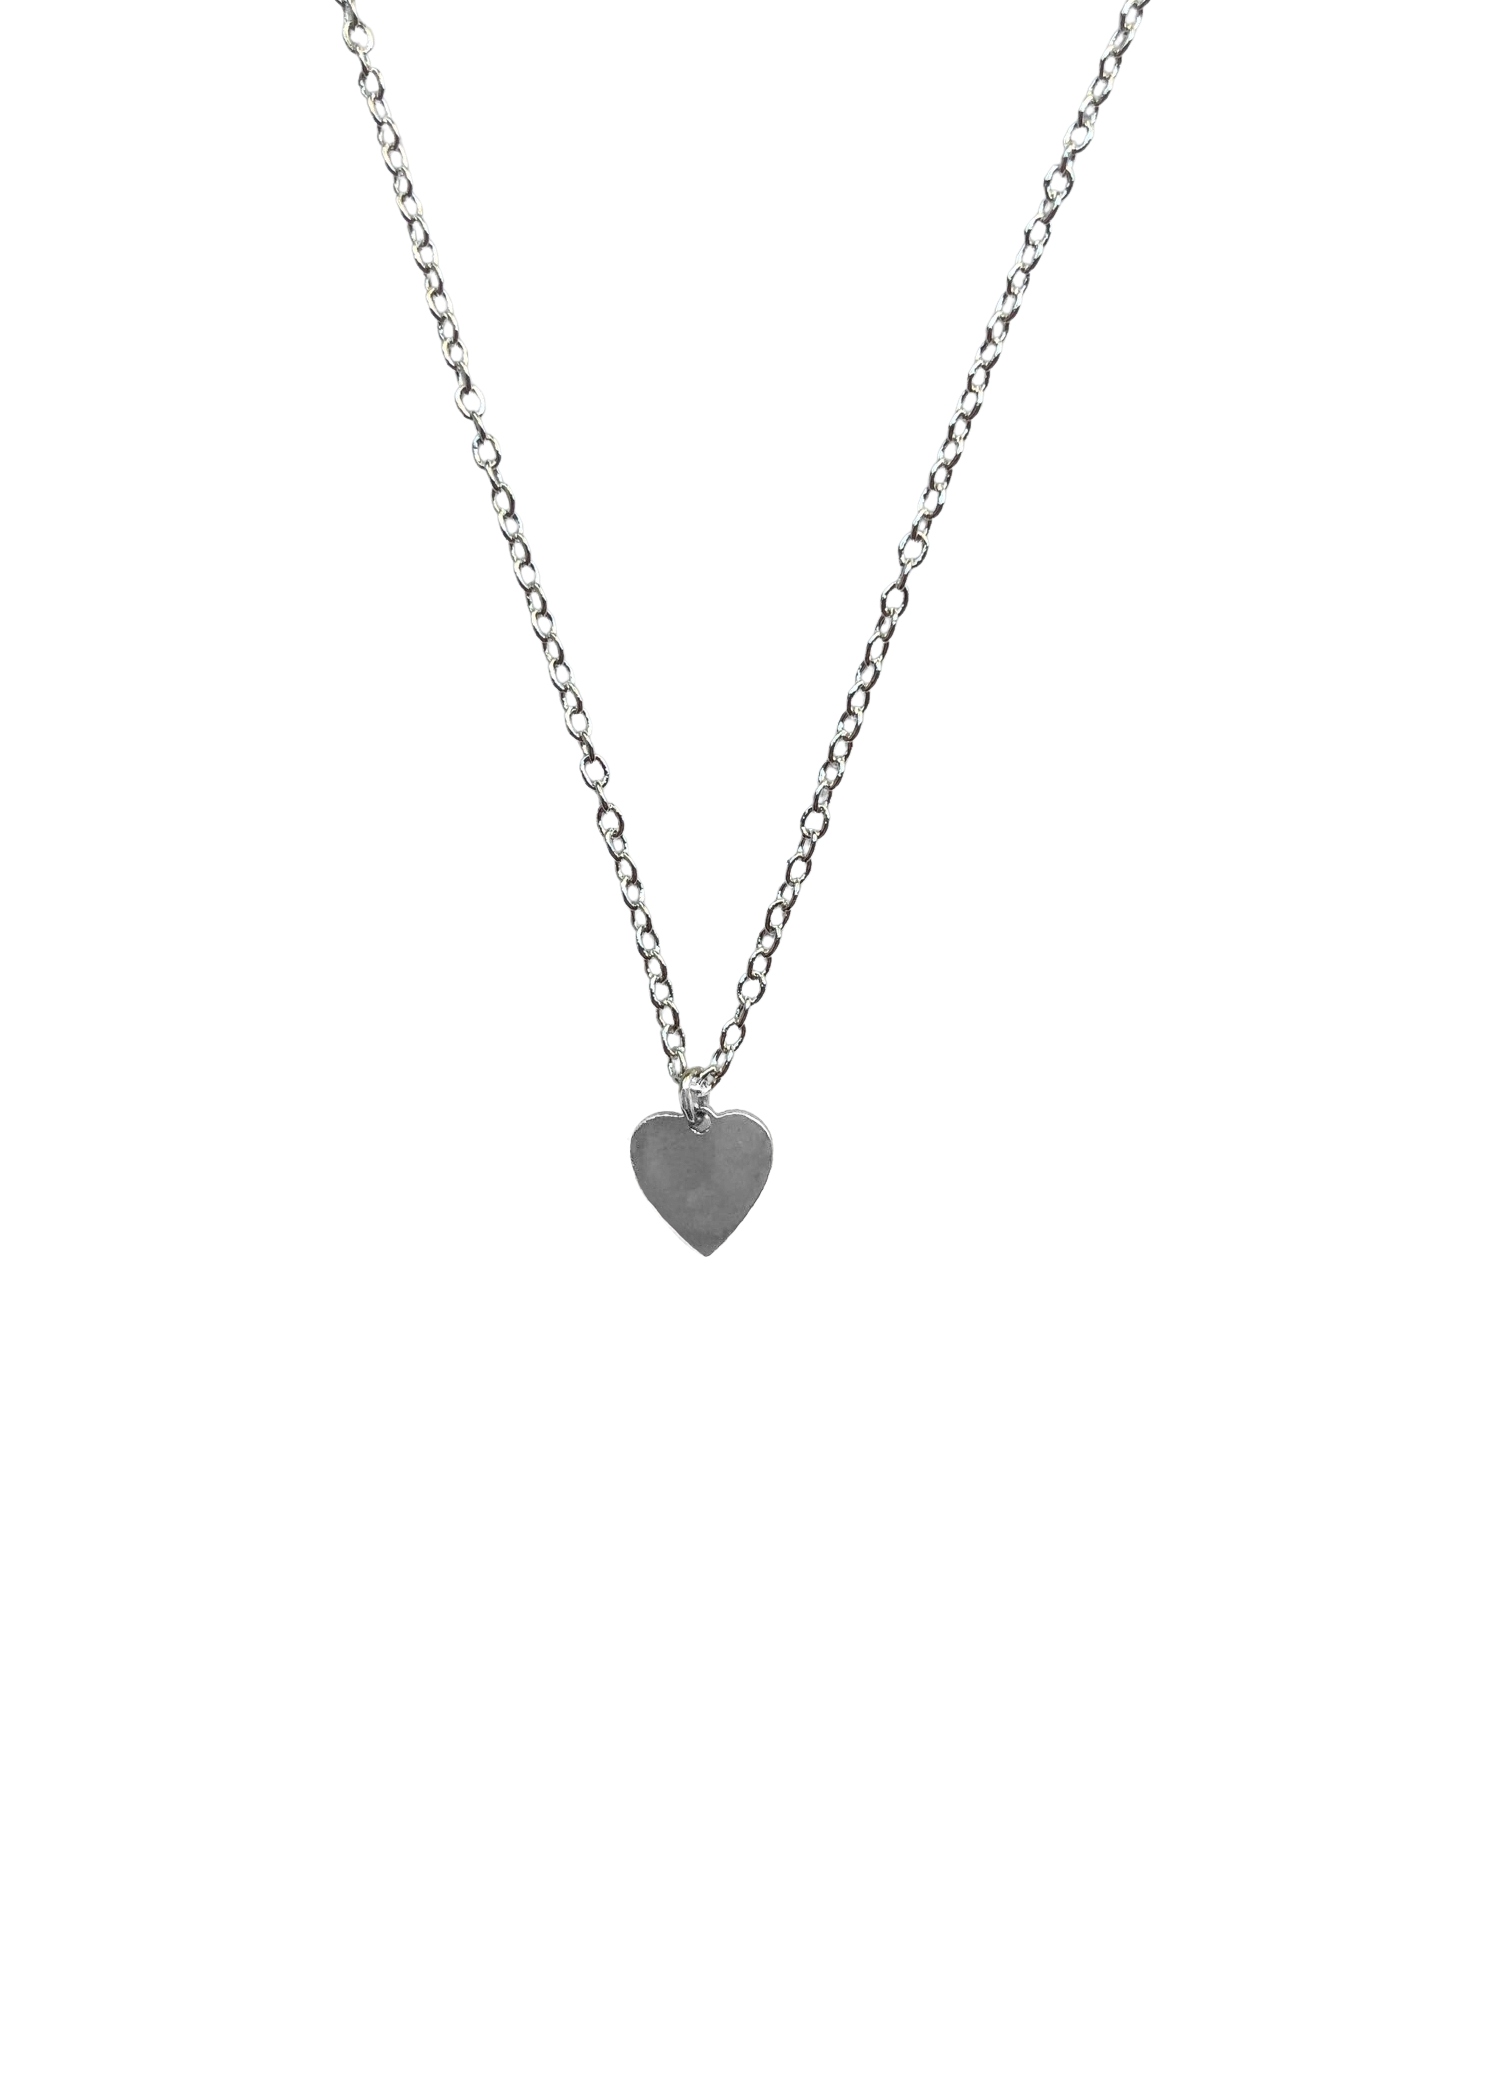 Heart Charm Necklace - .925 Sterling Silver